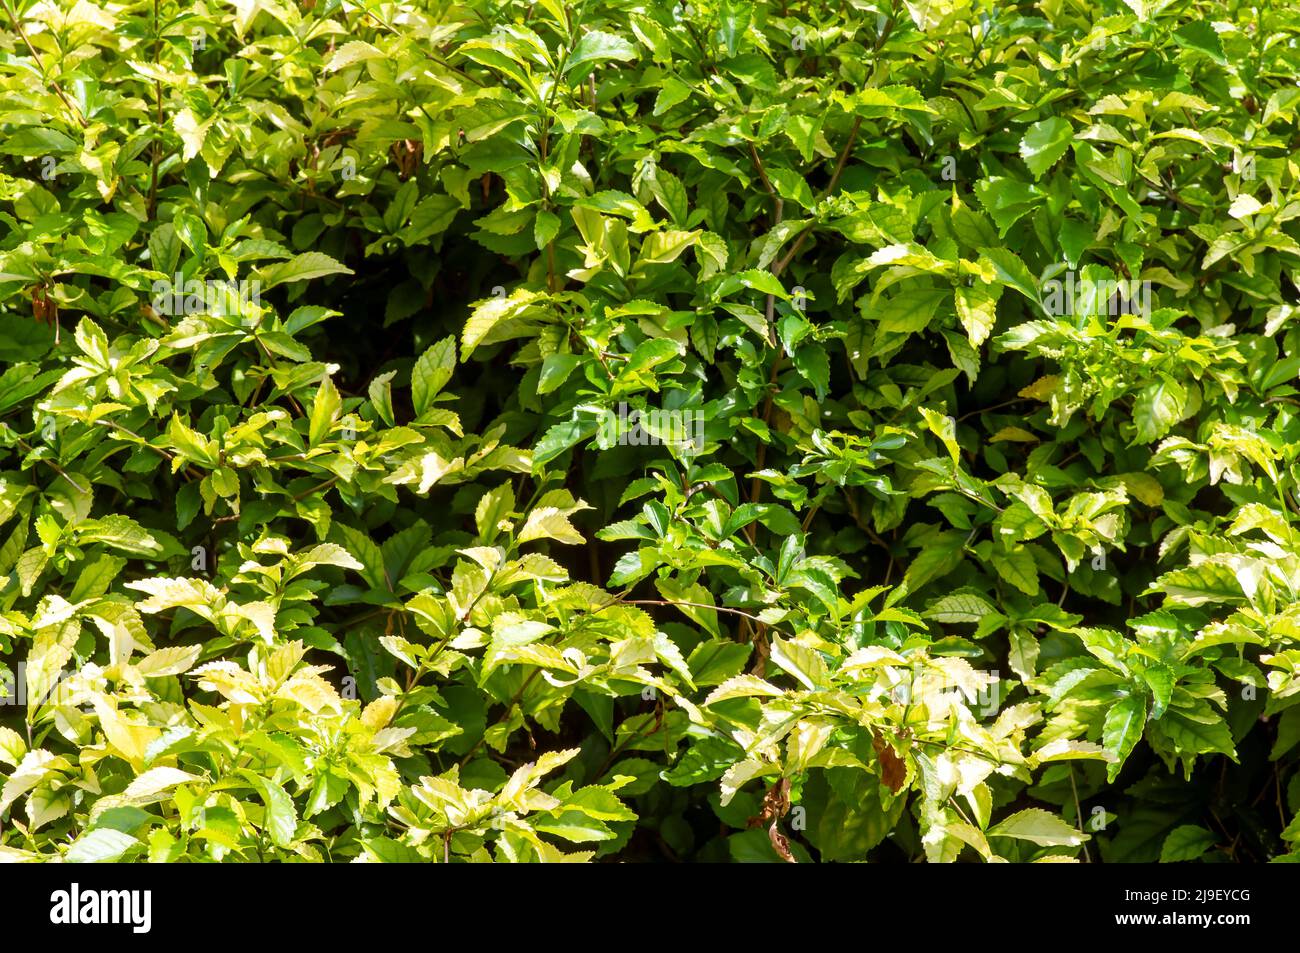 Green wild tea (Acalypha siamensis) leaves for natural background Stock Photo